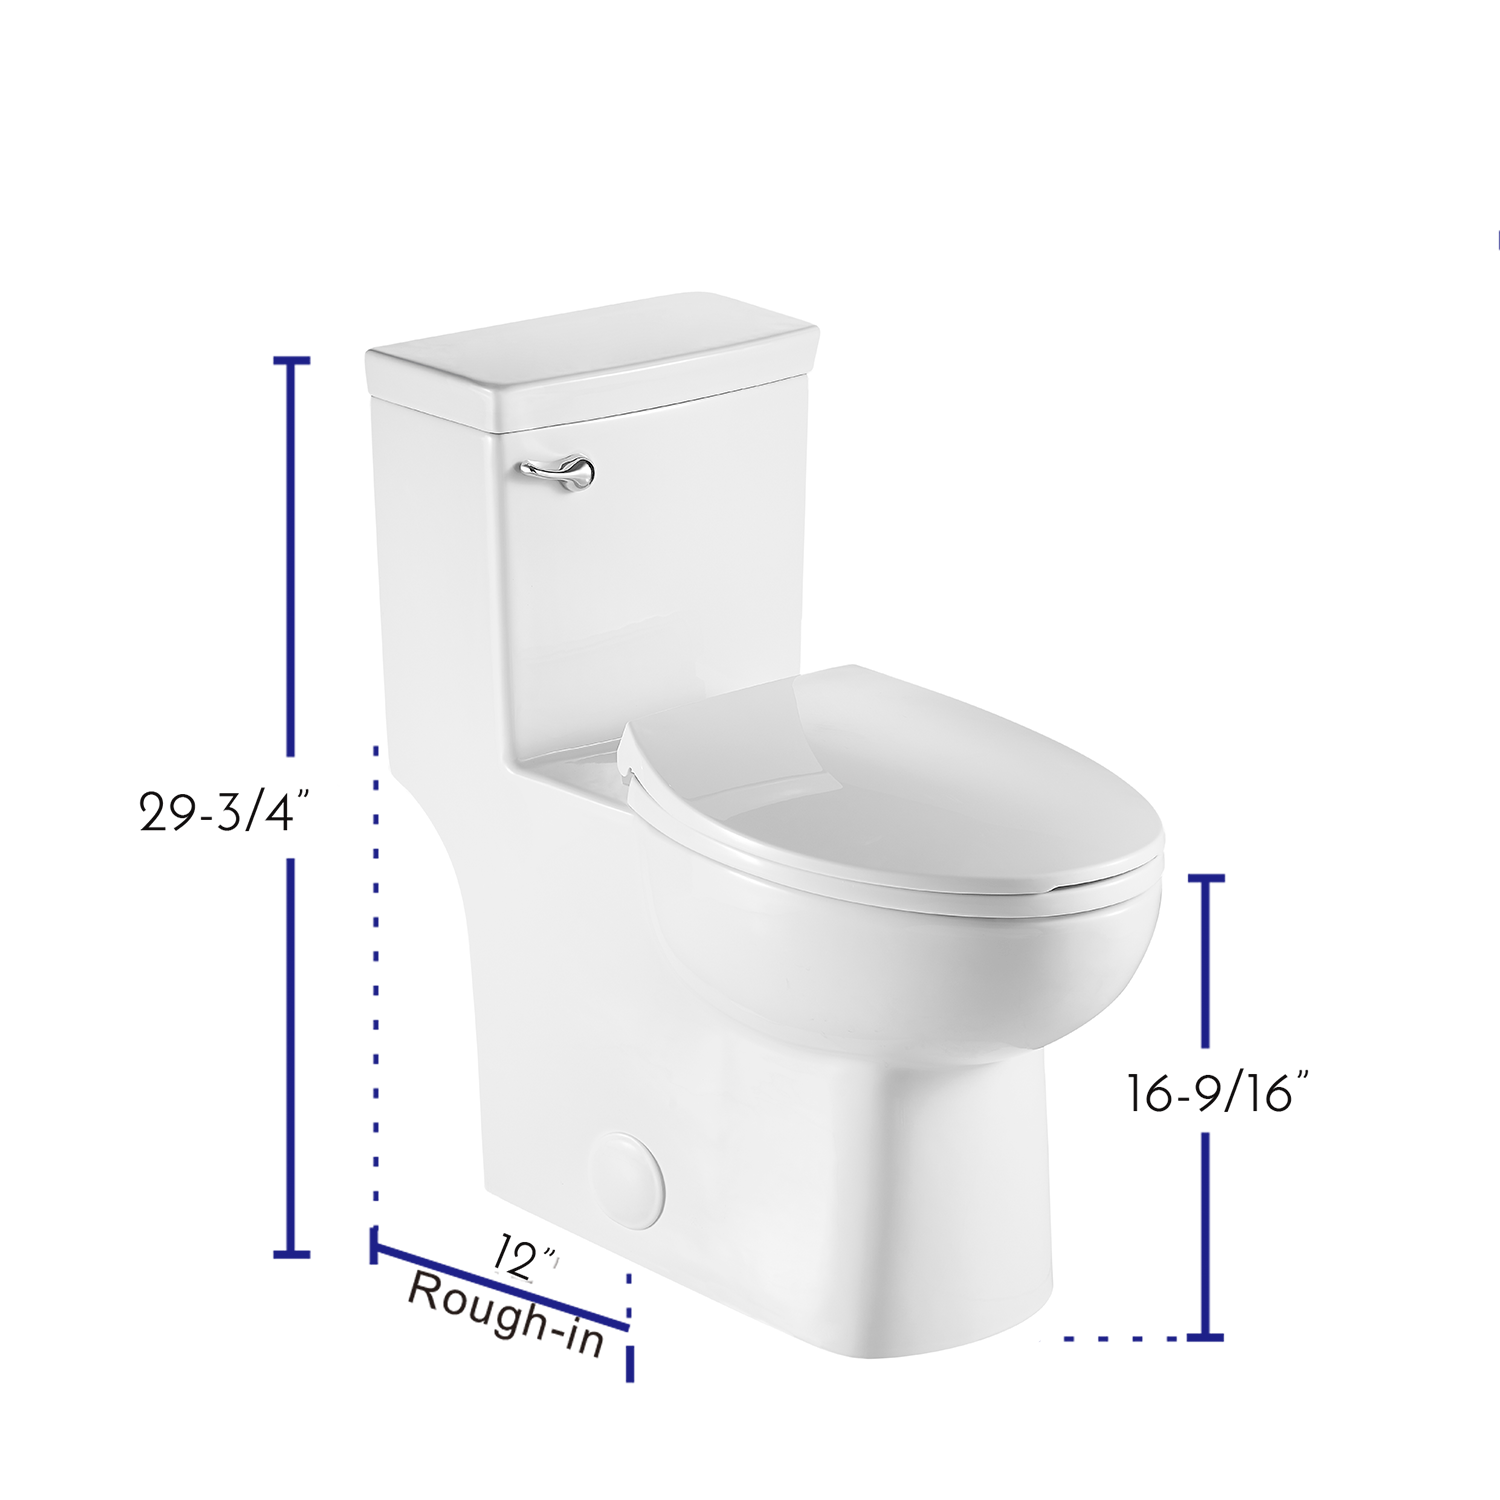 DAX Toilet with Soft Closing Seat - cUPC and ADA Complaint  (BSN-CL12335S)